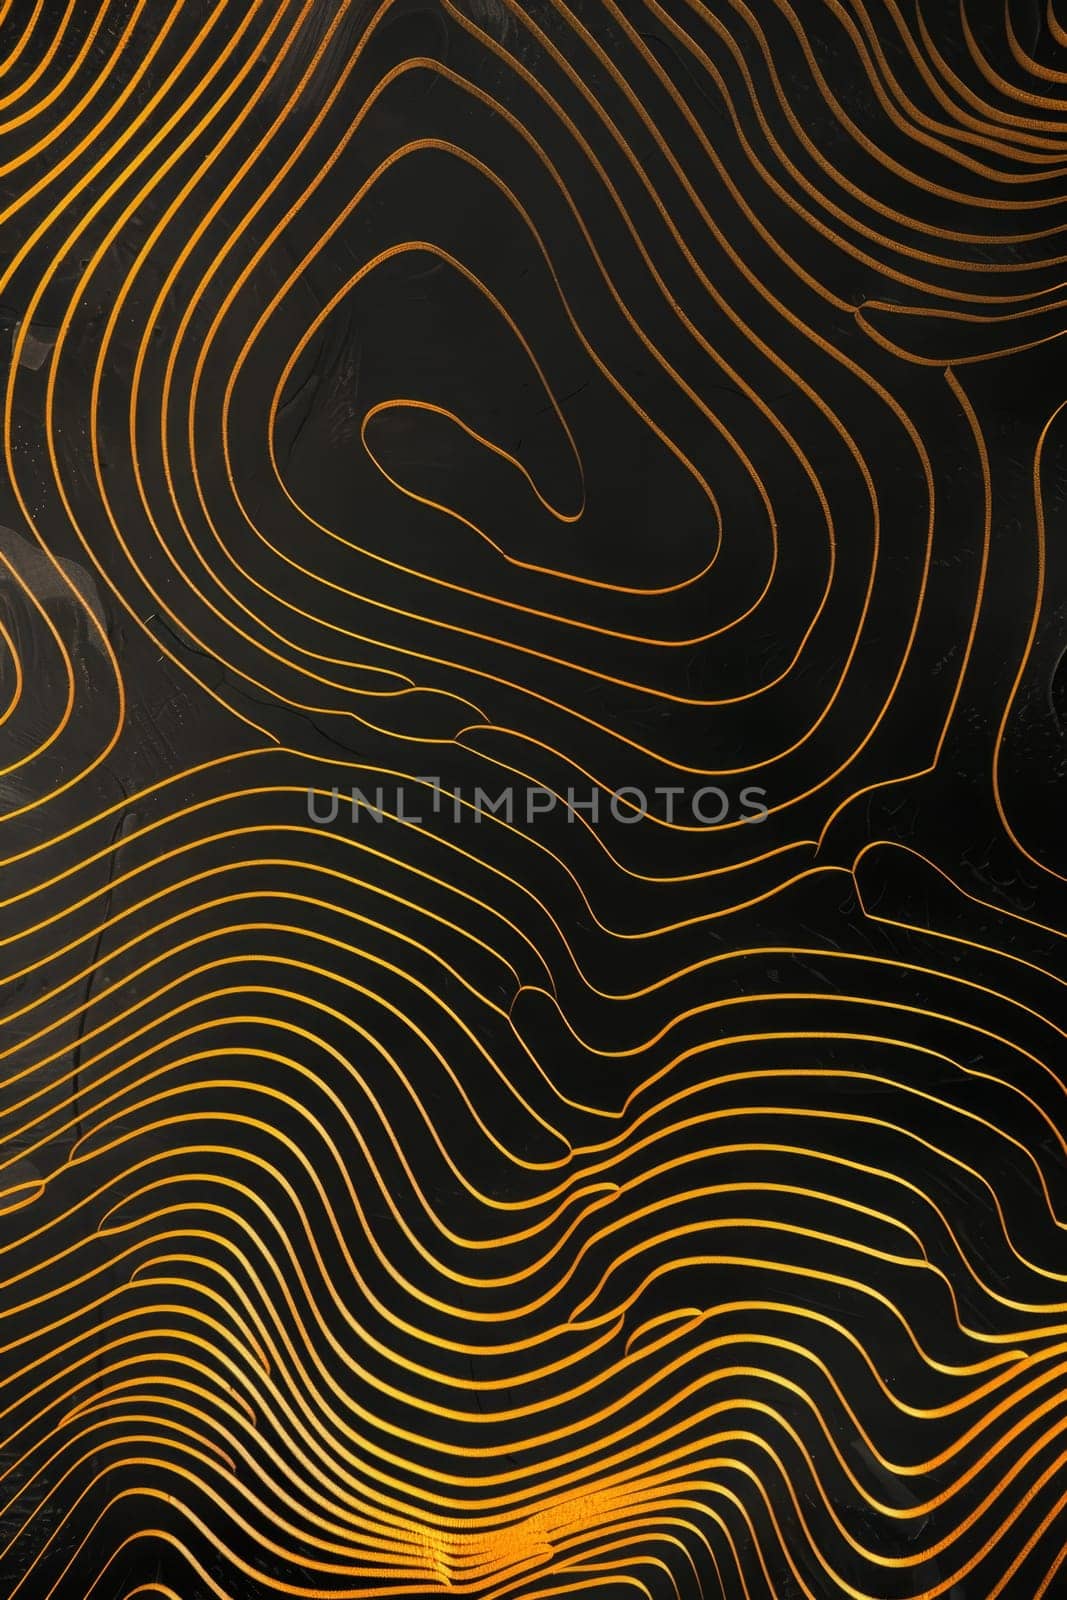 A golden abstract fingerprint on a black background. Illustration by Lobachad